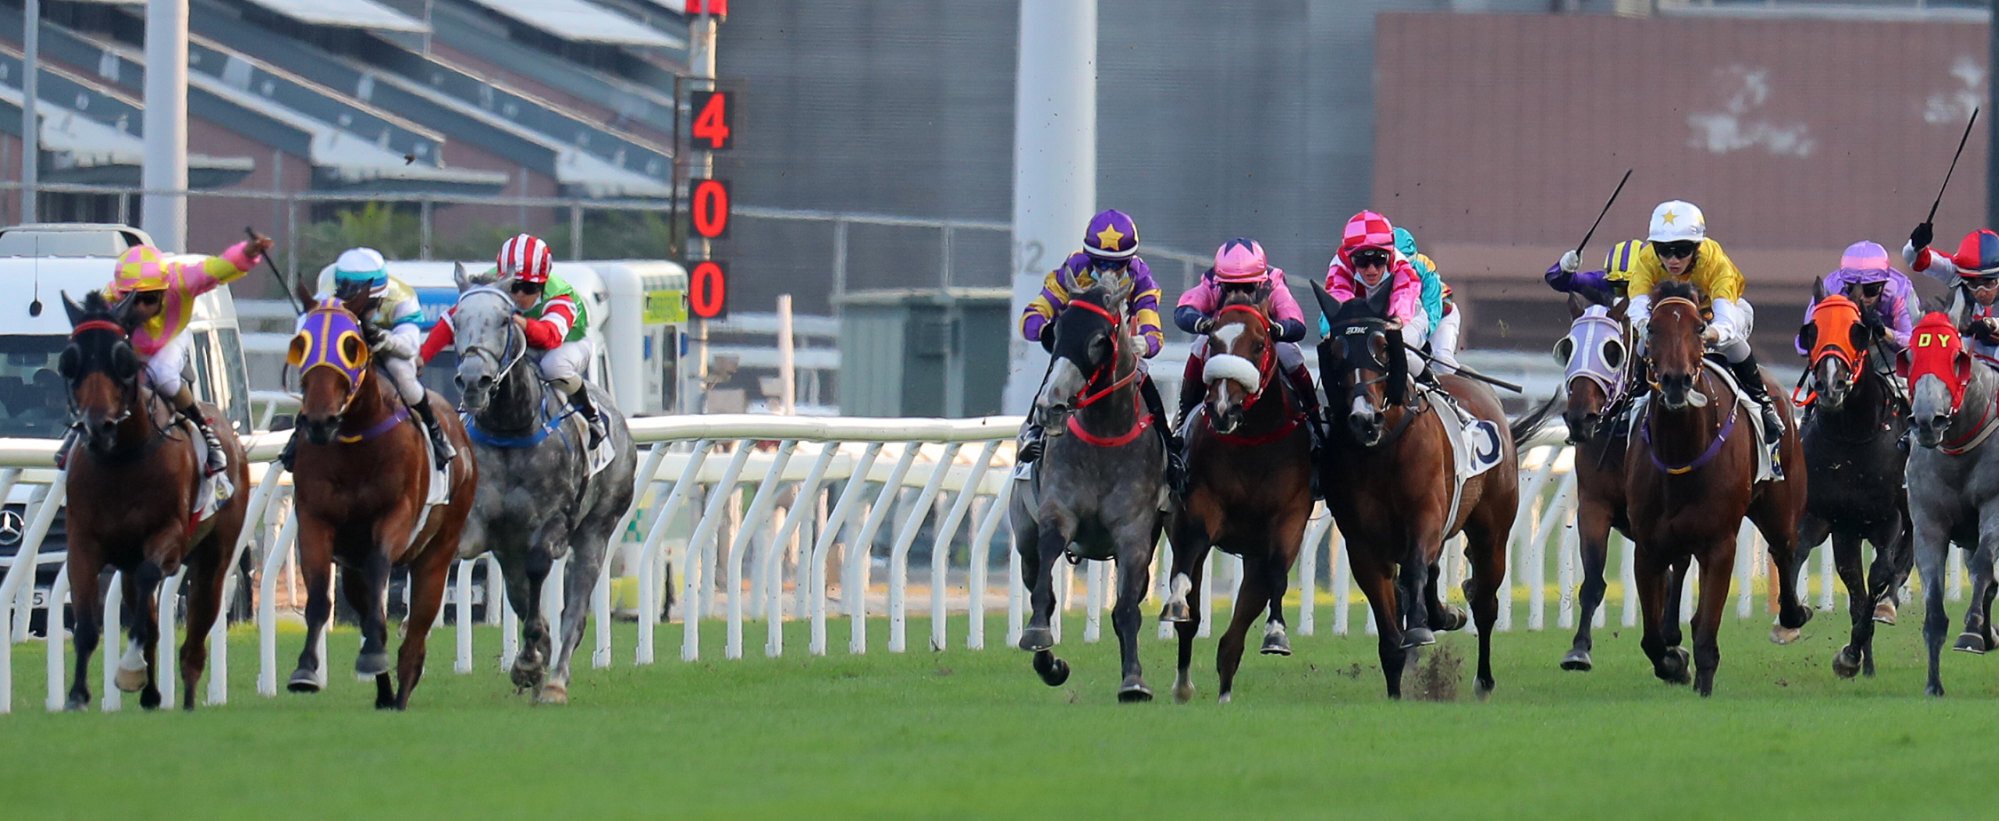 Hinchinlove (second from left) dashes clear while Silver Express (centre) causes interference in the straight. 